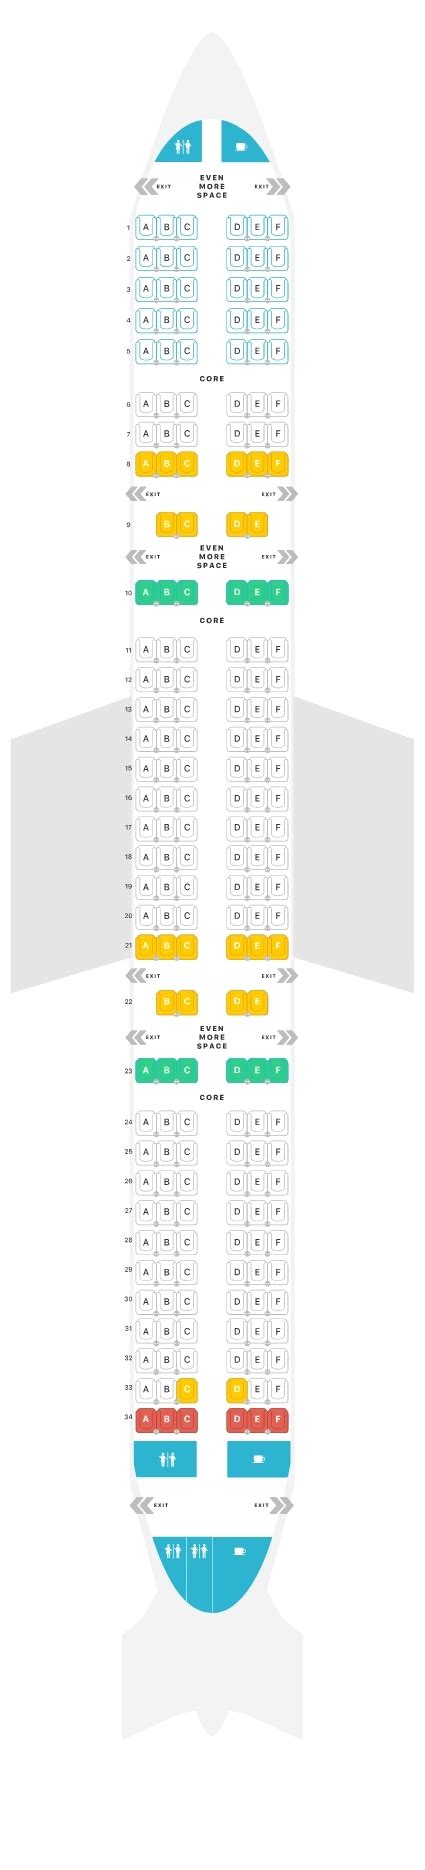 Jetblue A321 Seat Map — How To Choose The Best Seats For The Flight